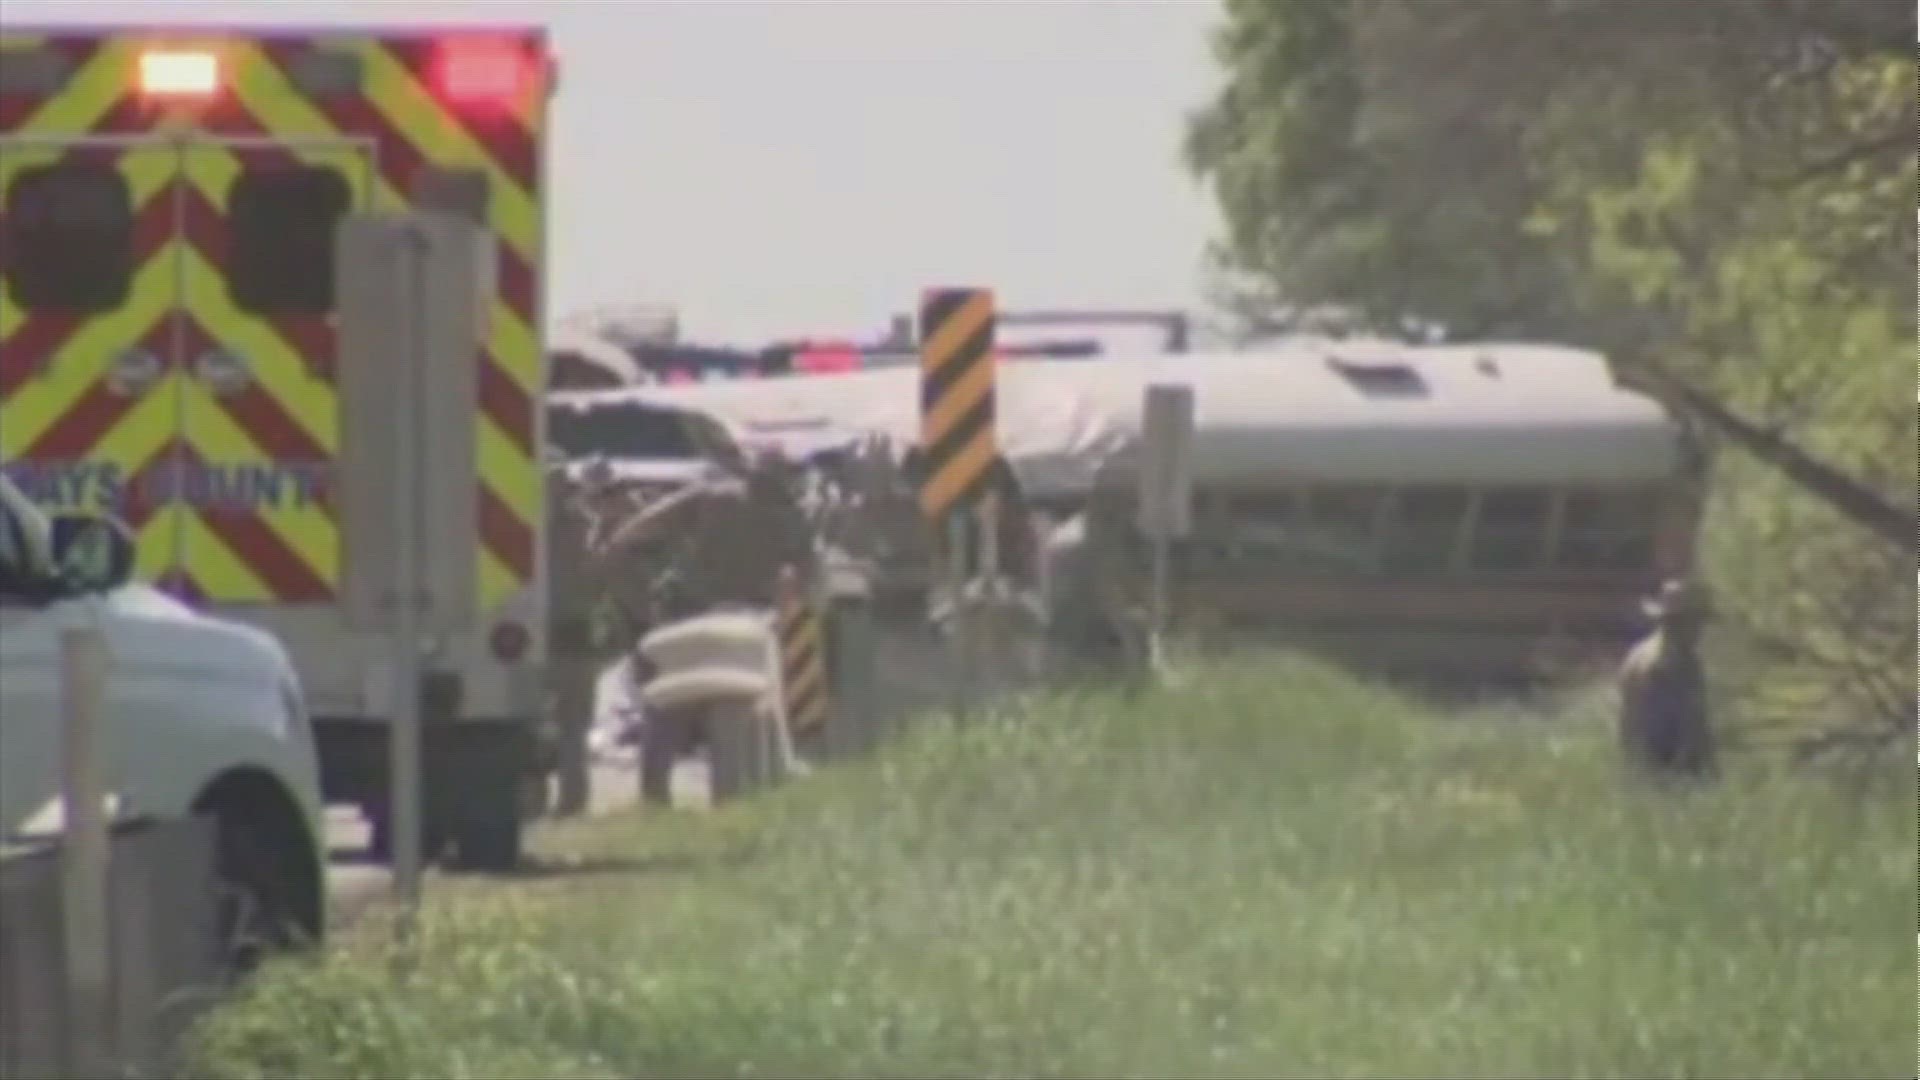 The accident happened in Bastrop County, southeast of Austin, on west state Highway 131.